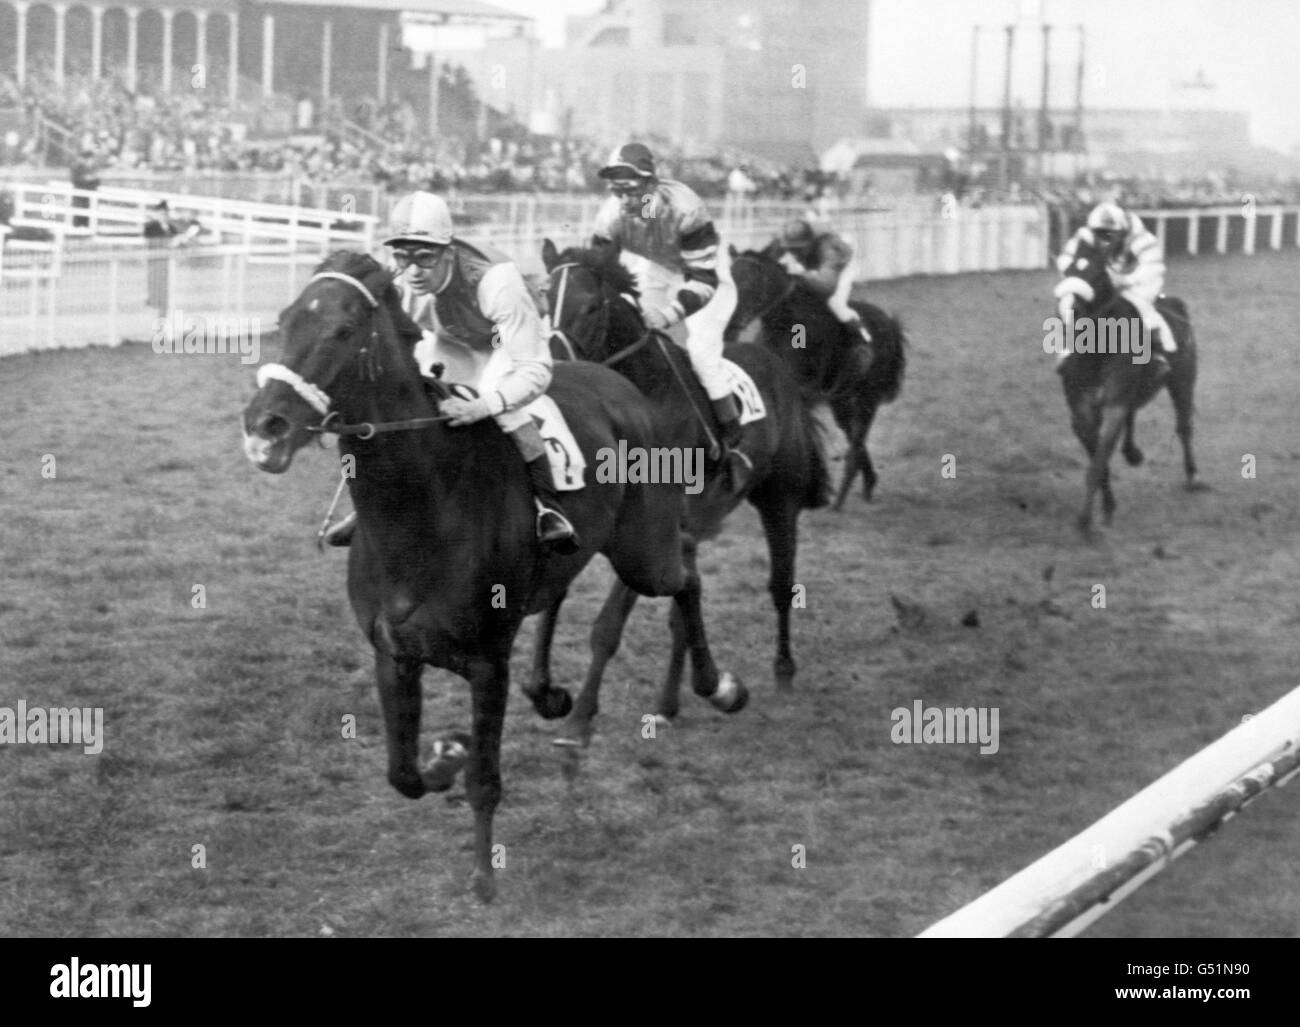 Finish of the Liverpool Spring Cup at Aintree with Sir Harold Wernher's High Perch, ridden by Jimmy Lindley, winning from Sir C. Gardiner's Dairialatan, with D.W. Morris up. Third is J. McGrath's Arcticeelagh, ridden by D. Ryan. Stock Photo